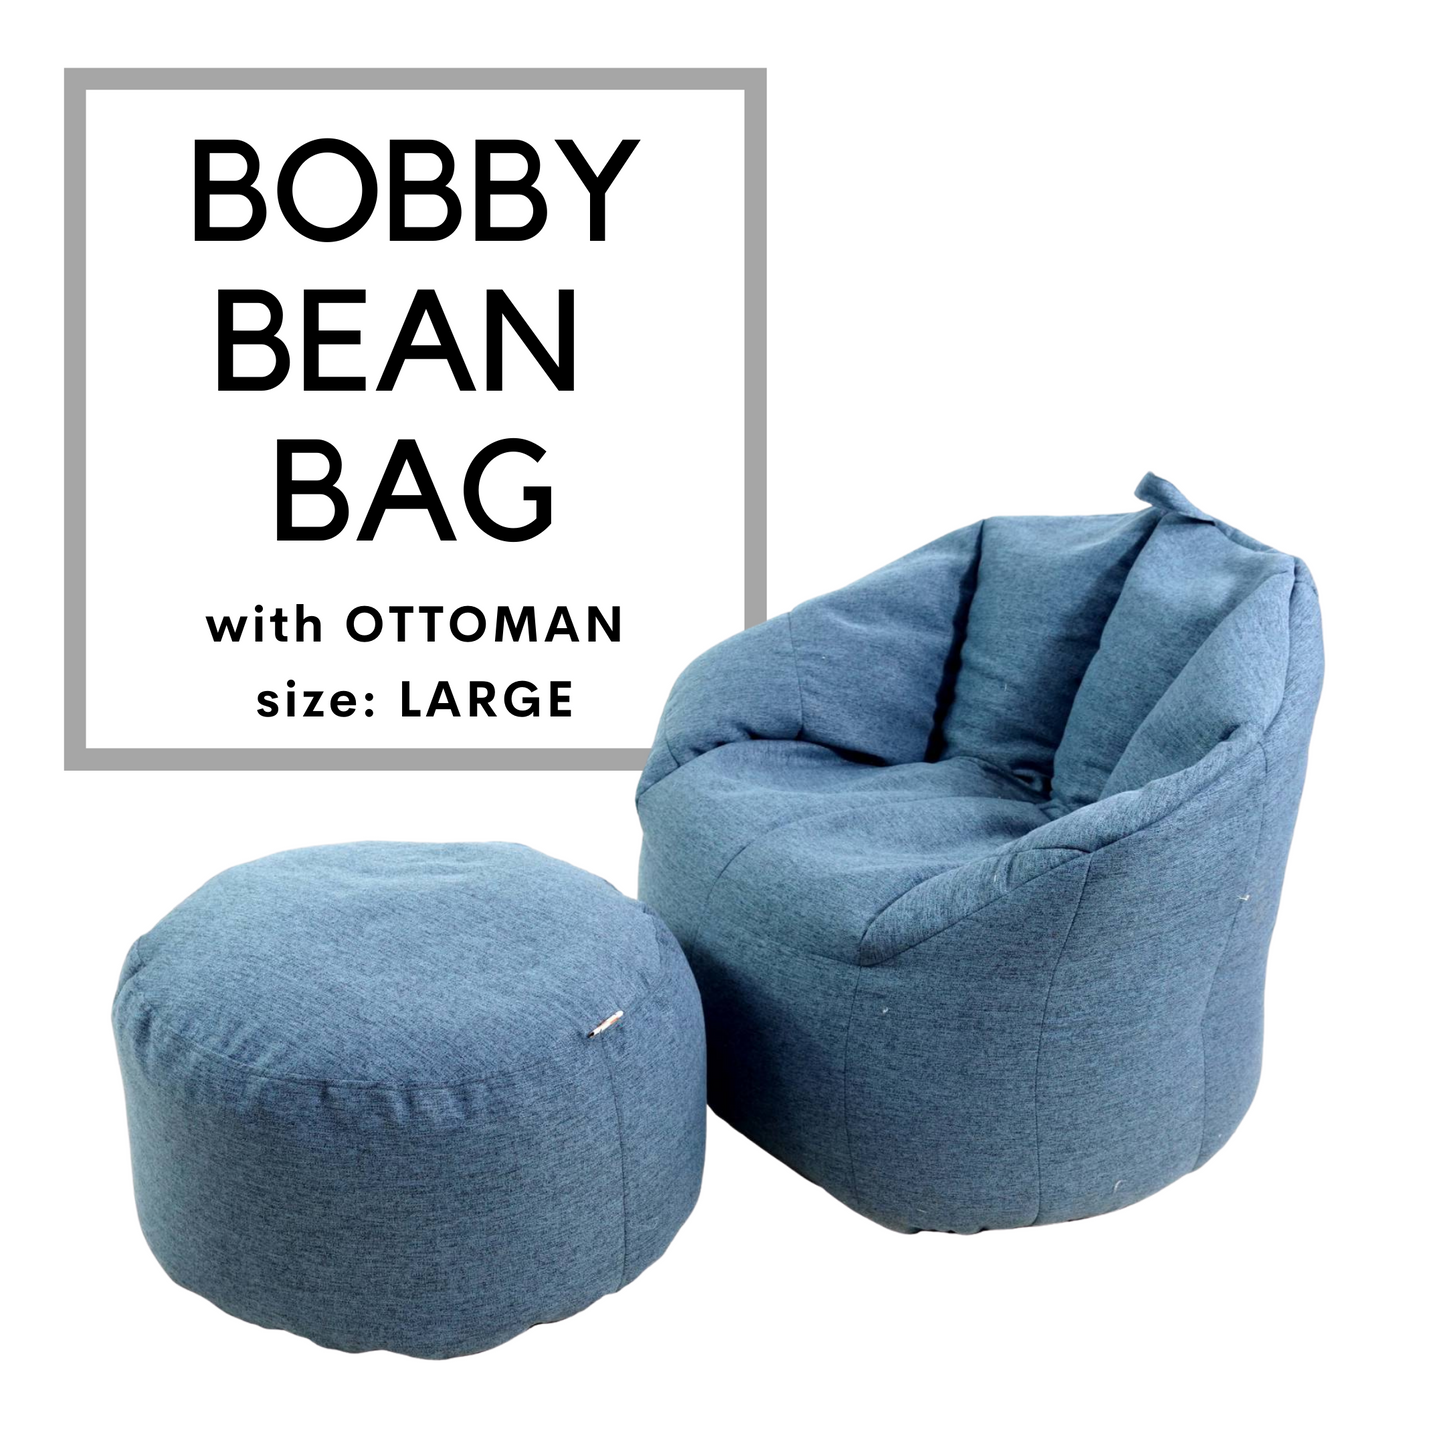 Bobby bean bag with Ottoman 34x24x32in